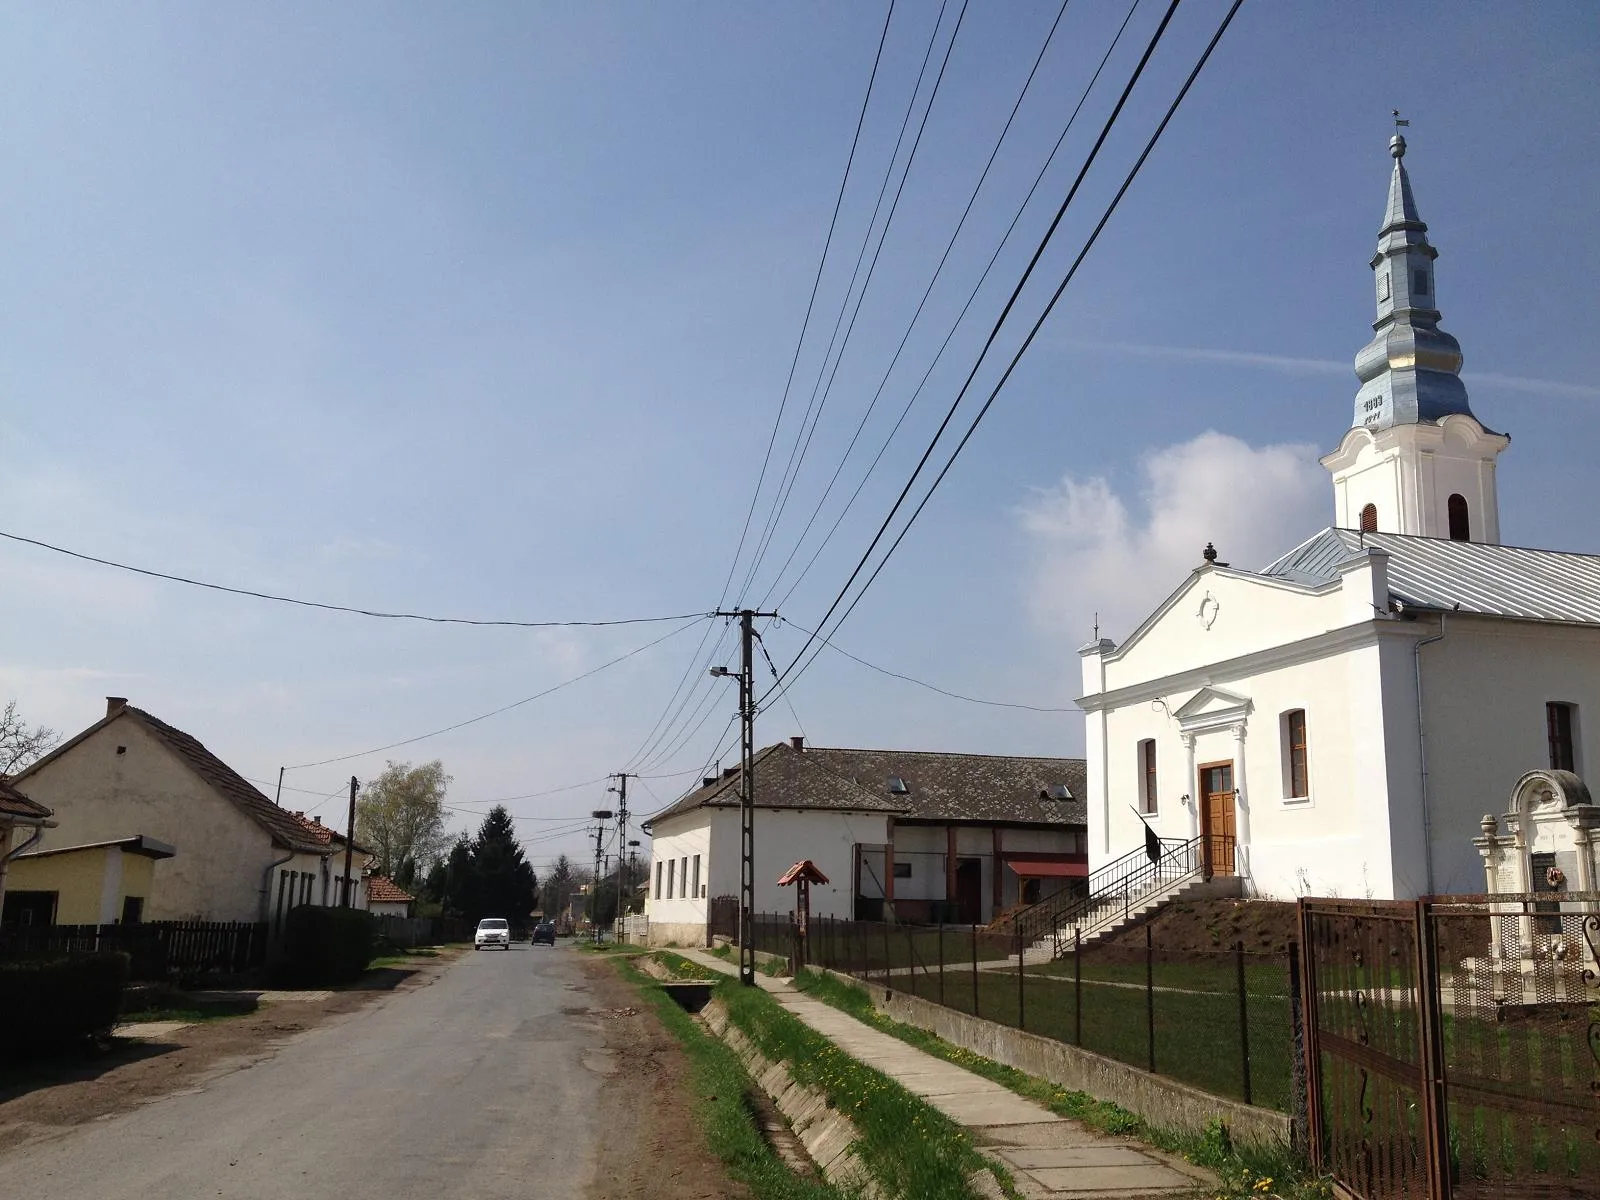 Photo showing: Village of Tiszaladány in Hungary